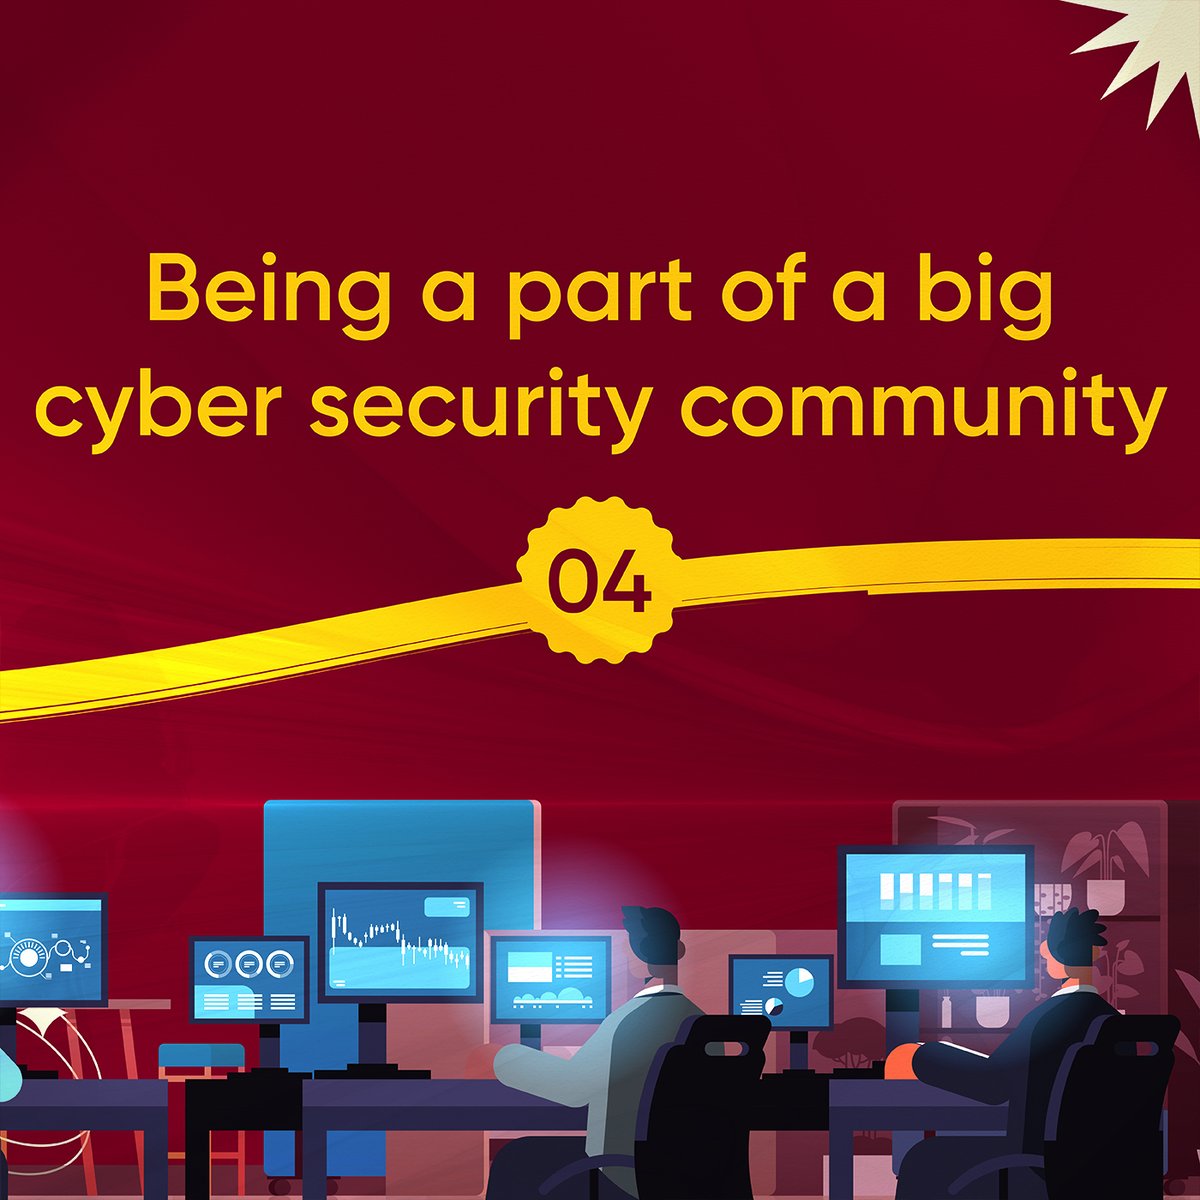 Why Join our iSec the Cybersecurity Community Group?

Fill out the form: forms.gle/mXHvDccQZr9D6q…
join our Community: bit.ly/iSecCommunity
then Press 'Resources' to get the courses

#ISEC #iseccommunity #CyberSecurityCareer